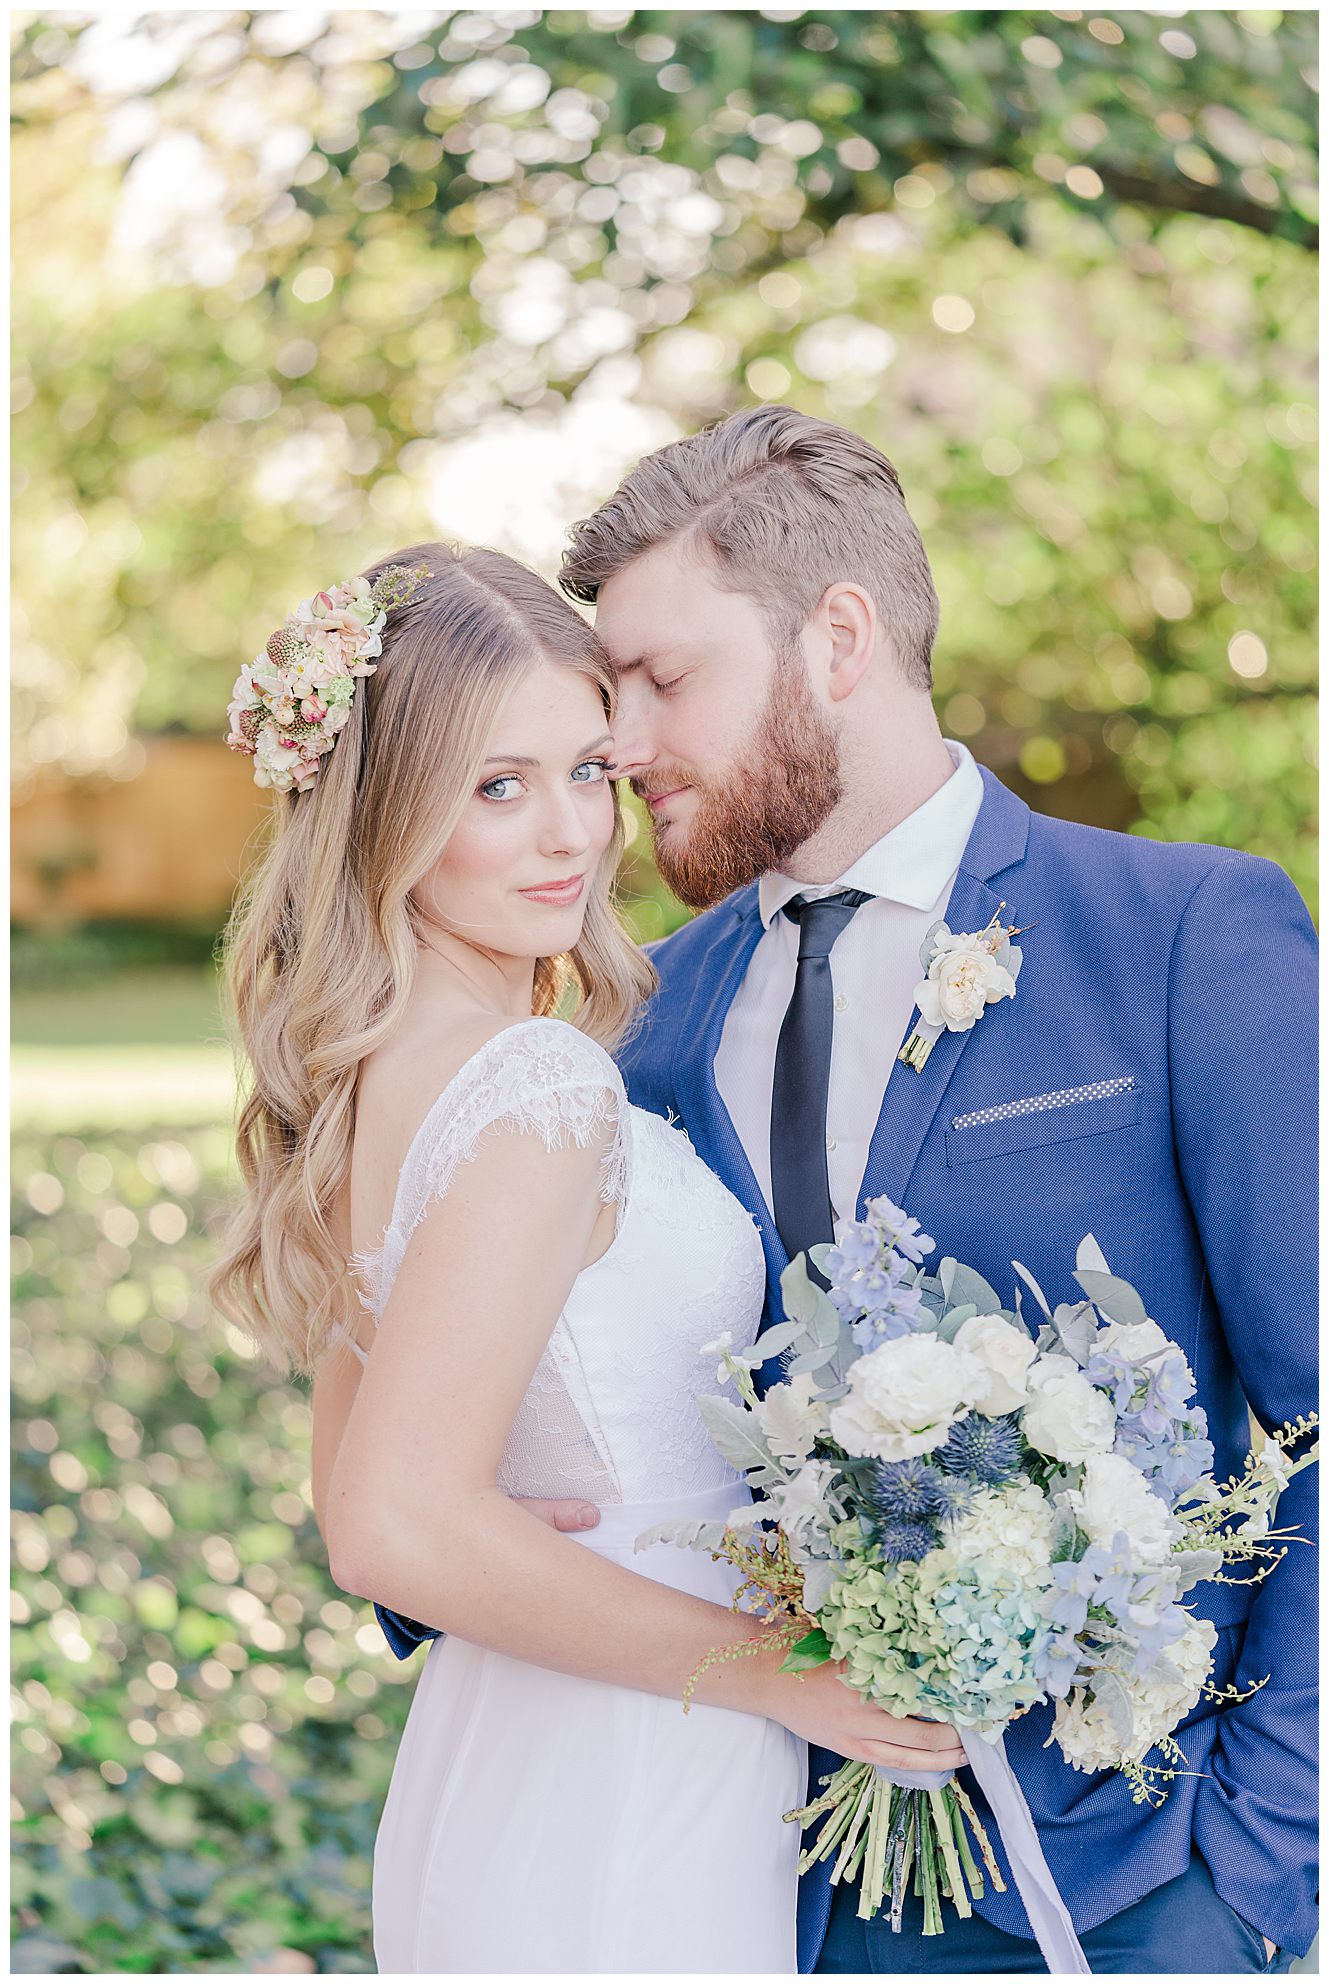 Best wedding photographer in Southern Highlands